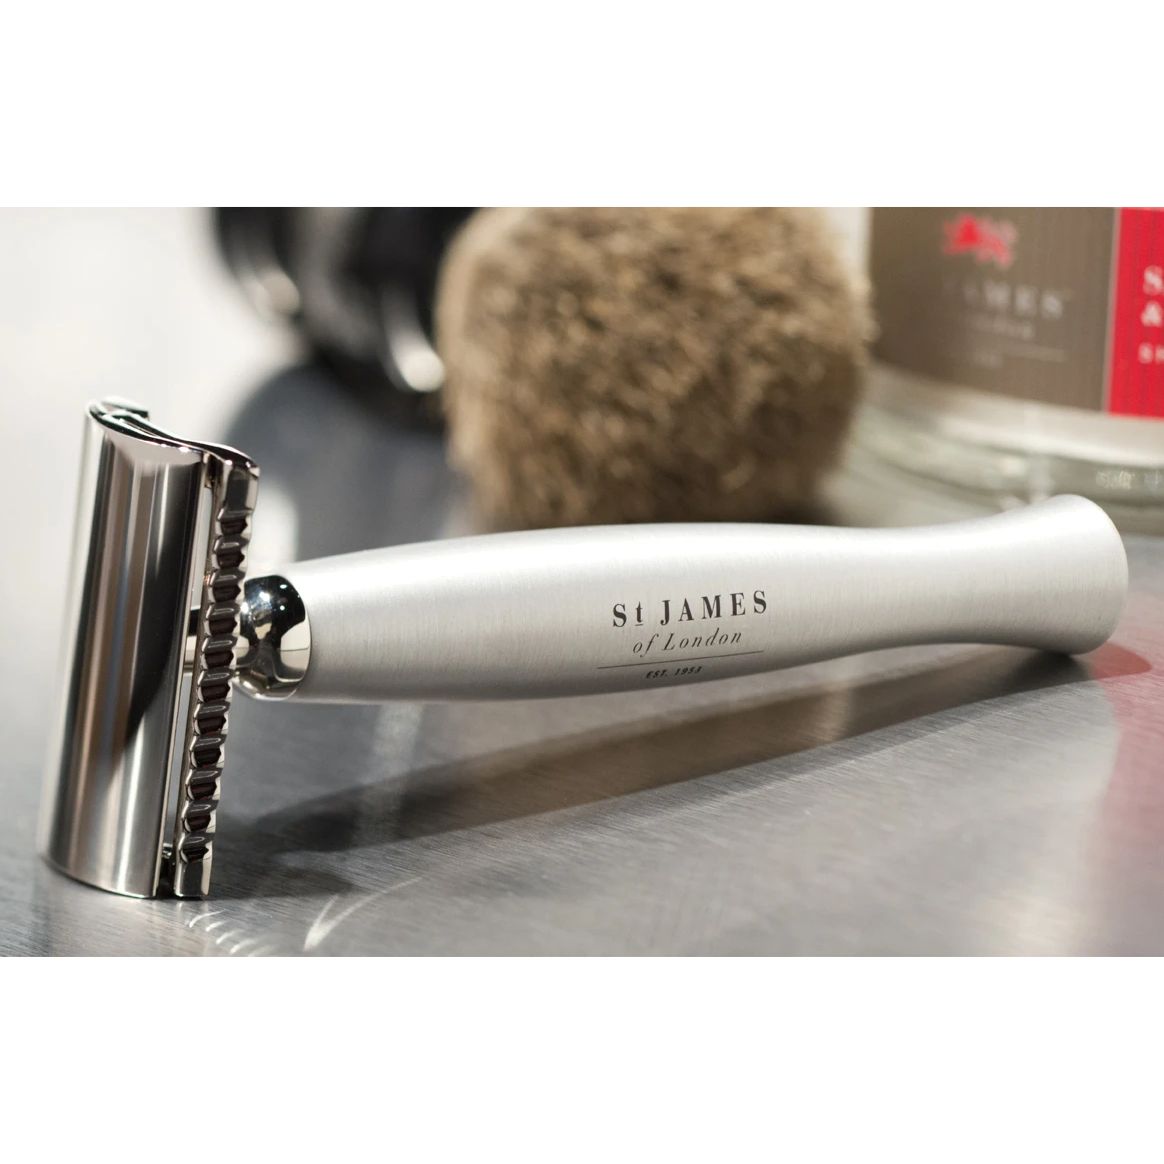 "Cheeky B'stard" Handcrafted Safety Razor in Brushed Metal by St. James of London